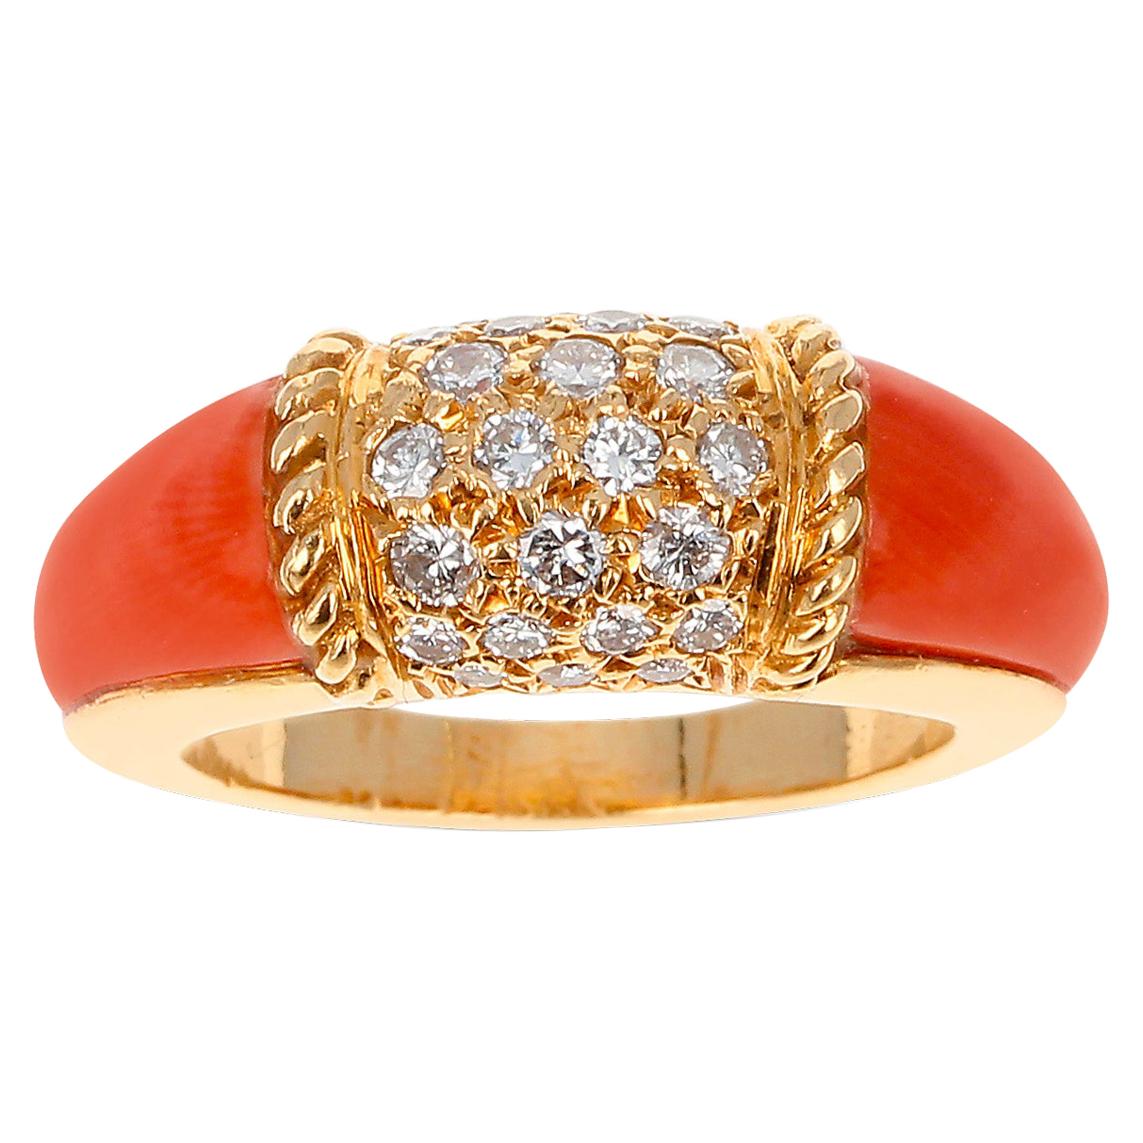 Van Cleef & Arpels Coral and 7 Row Diamond Stacking Philippine Ring, 18K Yellow